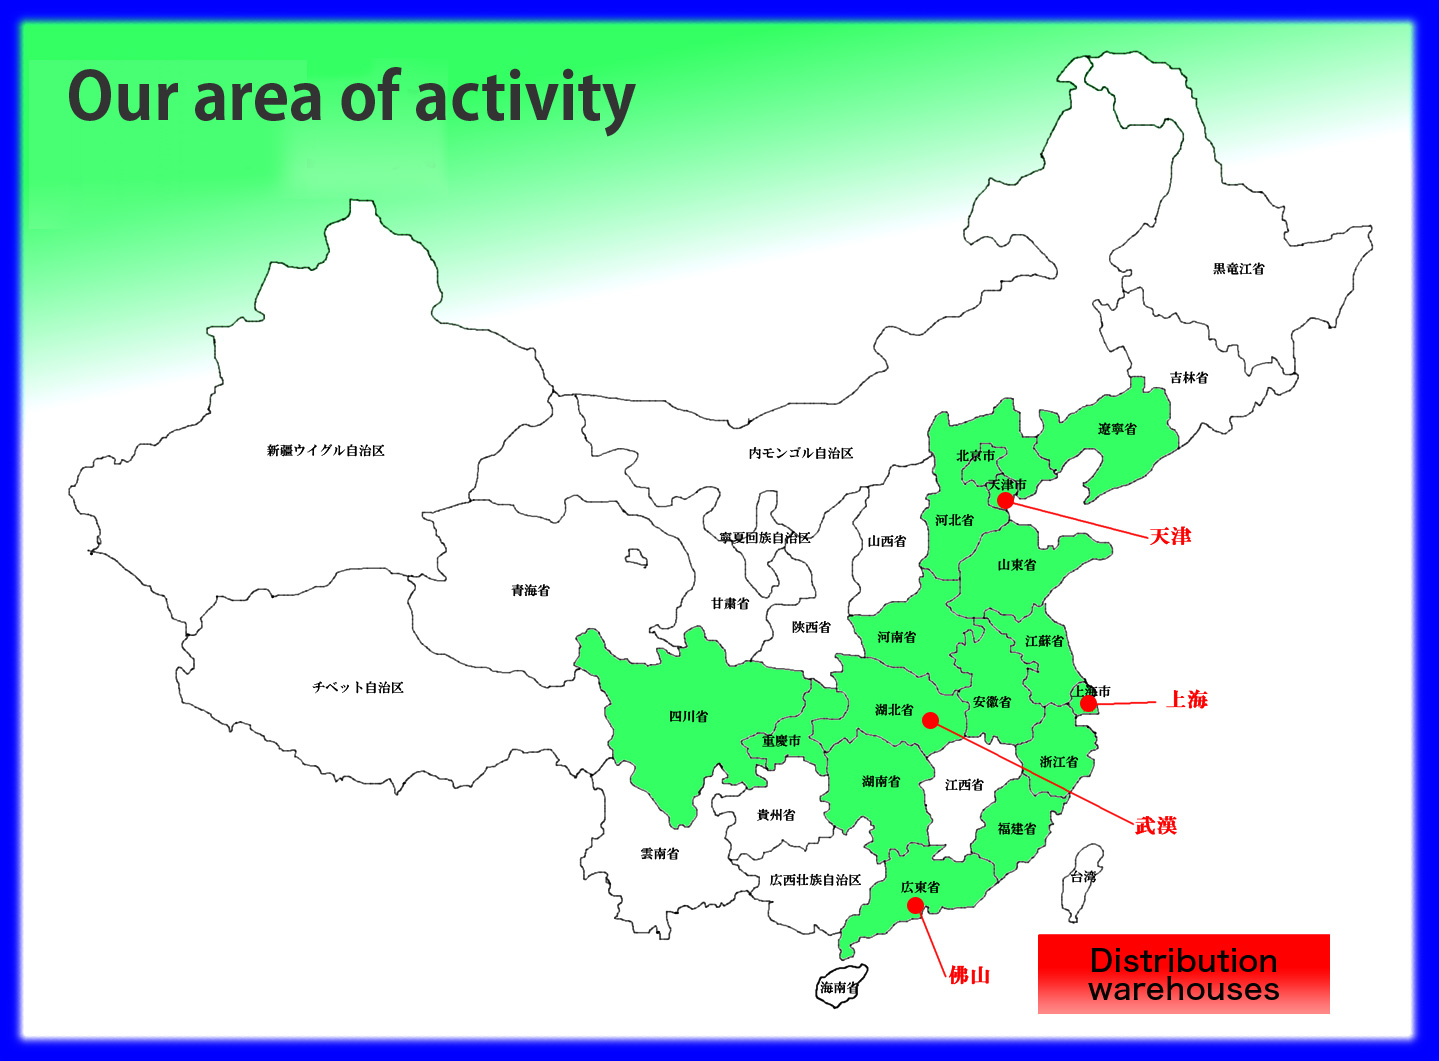 Our area of activity